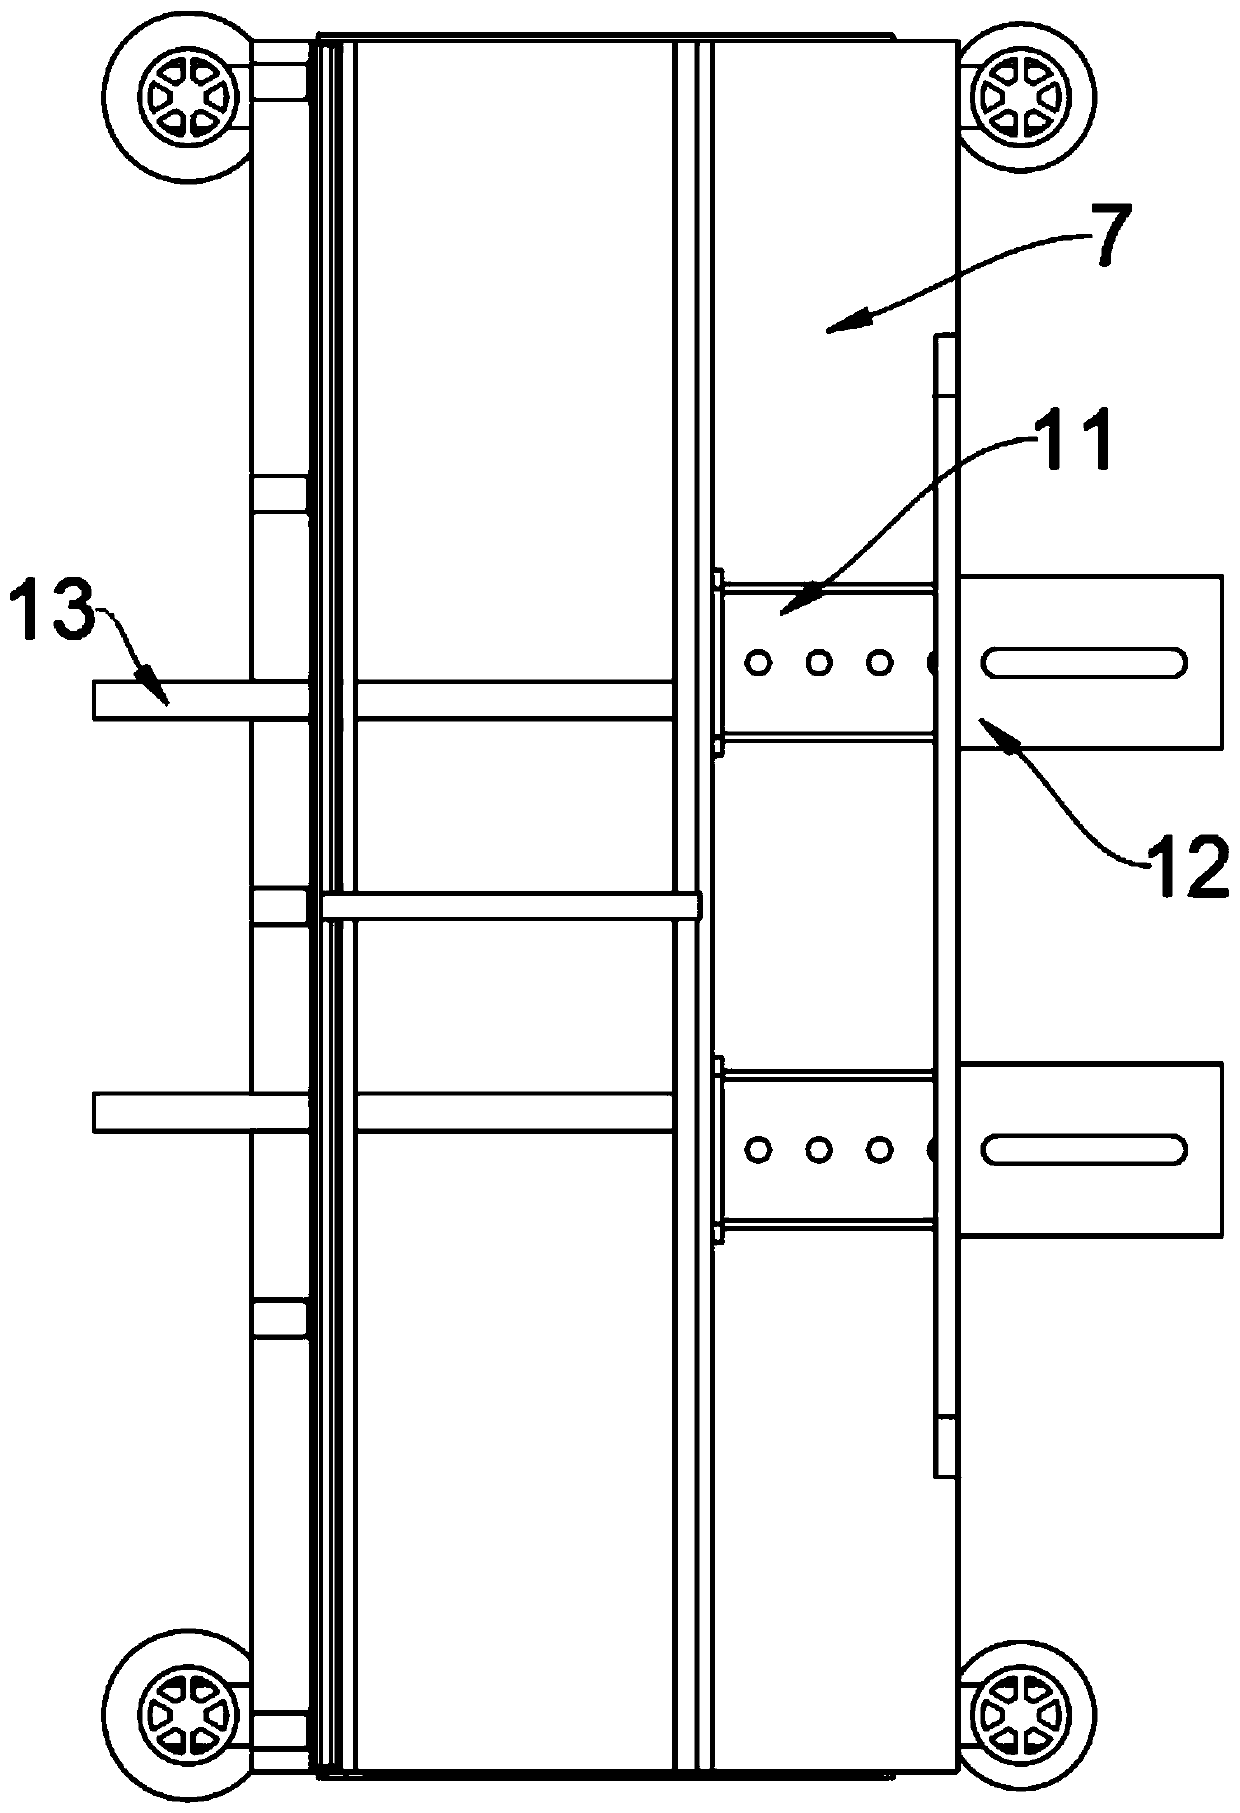 Movable mold capable of adjusting size of prefabricated member